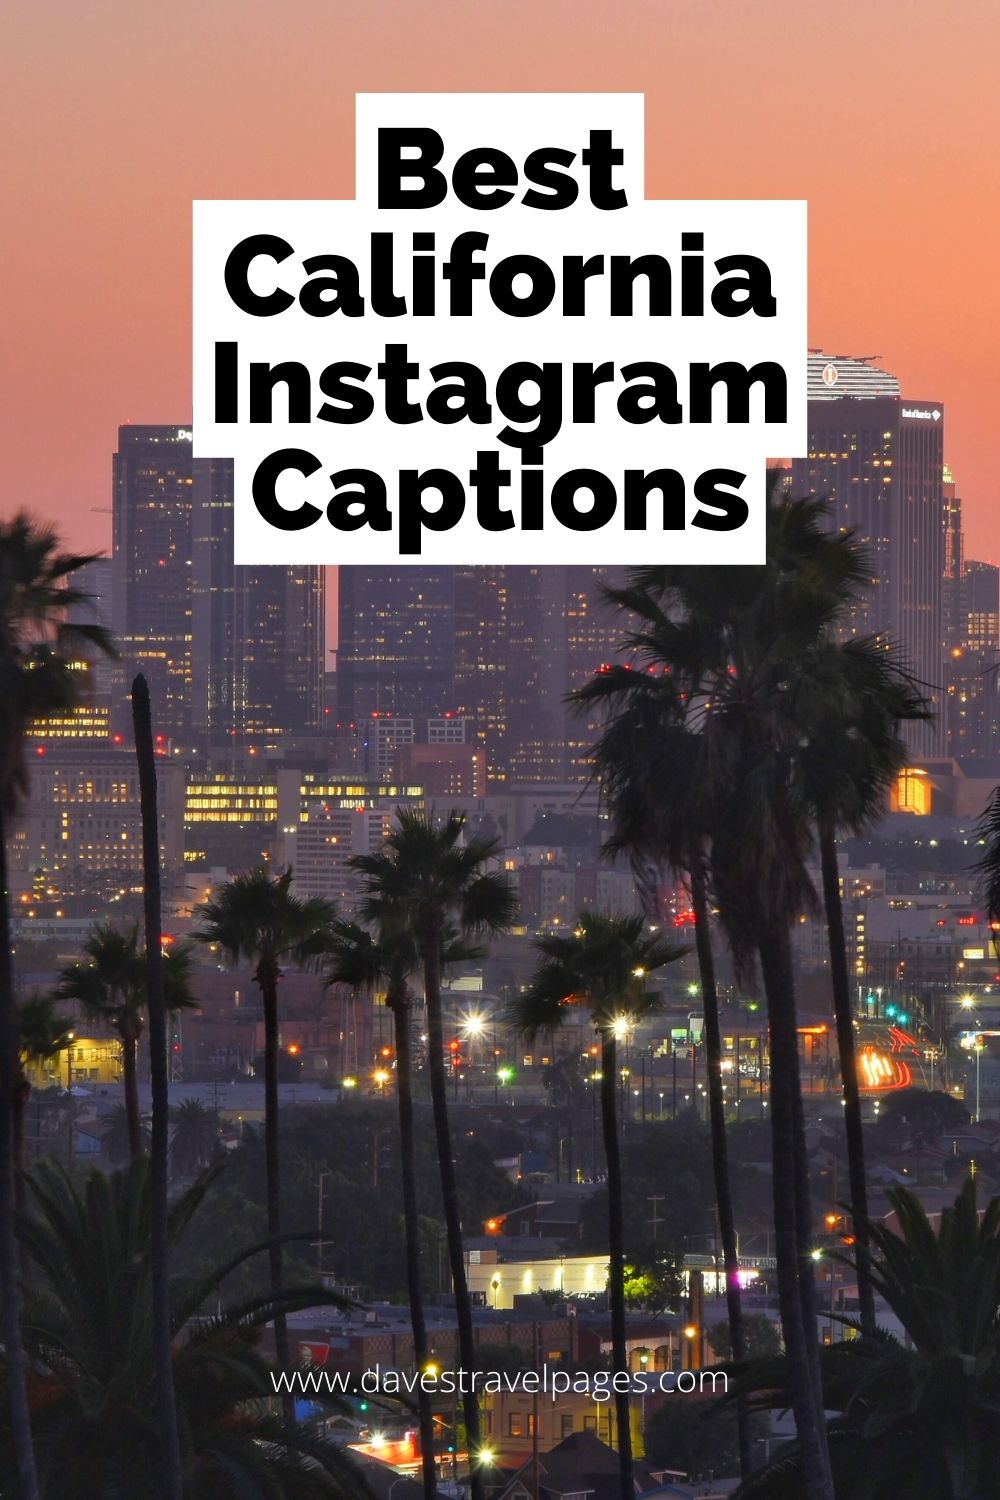 Instagram Captions About California